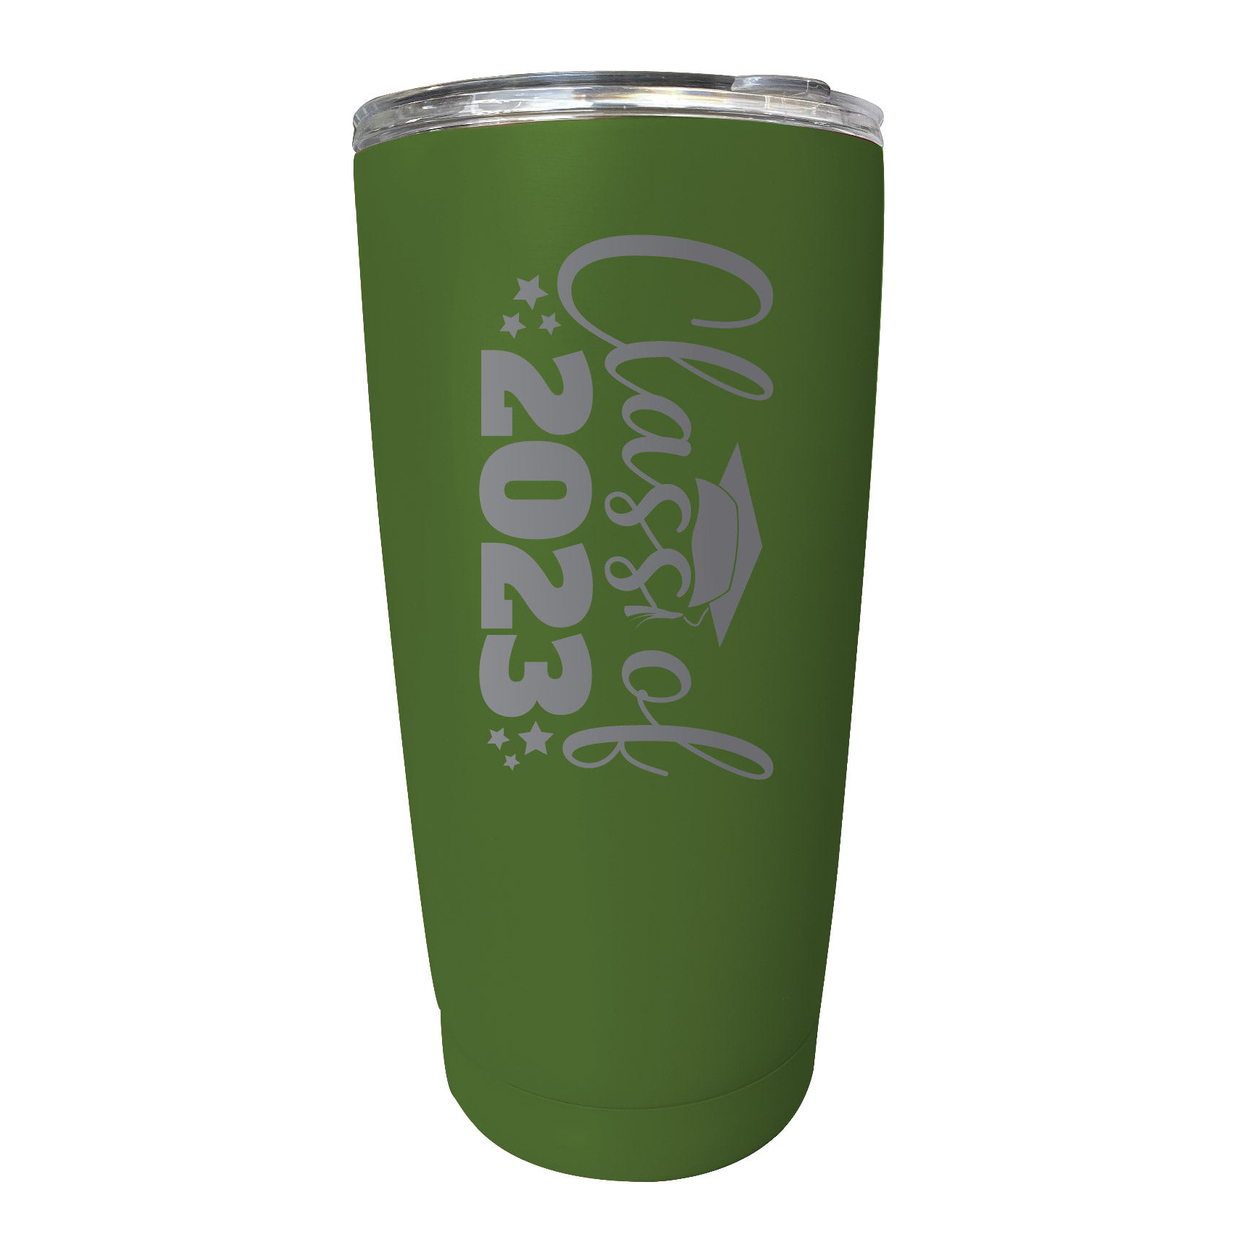 Class Of 2023 Graduation 16 Oz Engraved Stainless Steel Insulated Tumbler Colors - Black